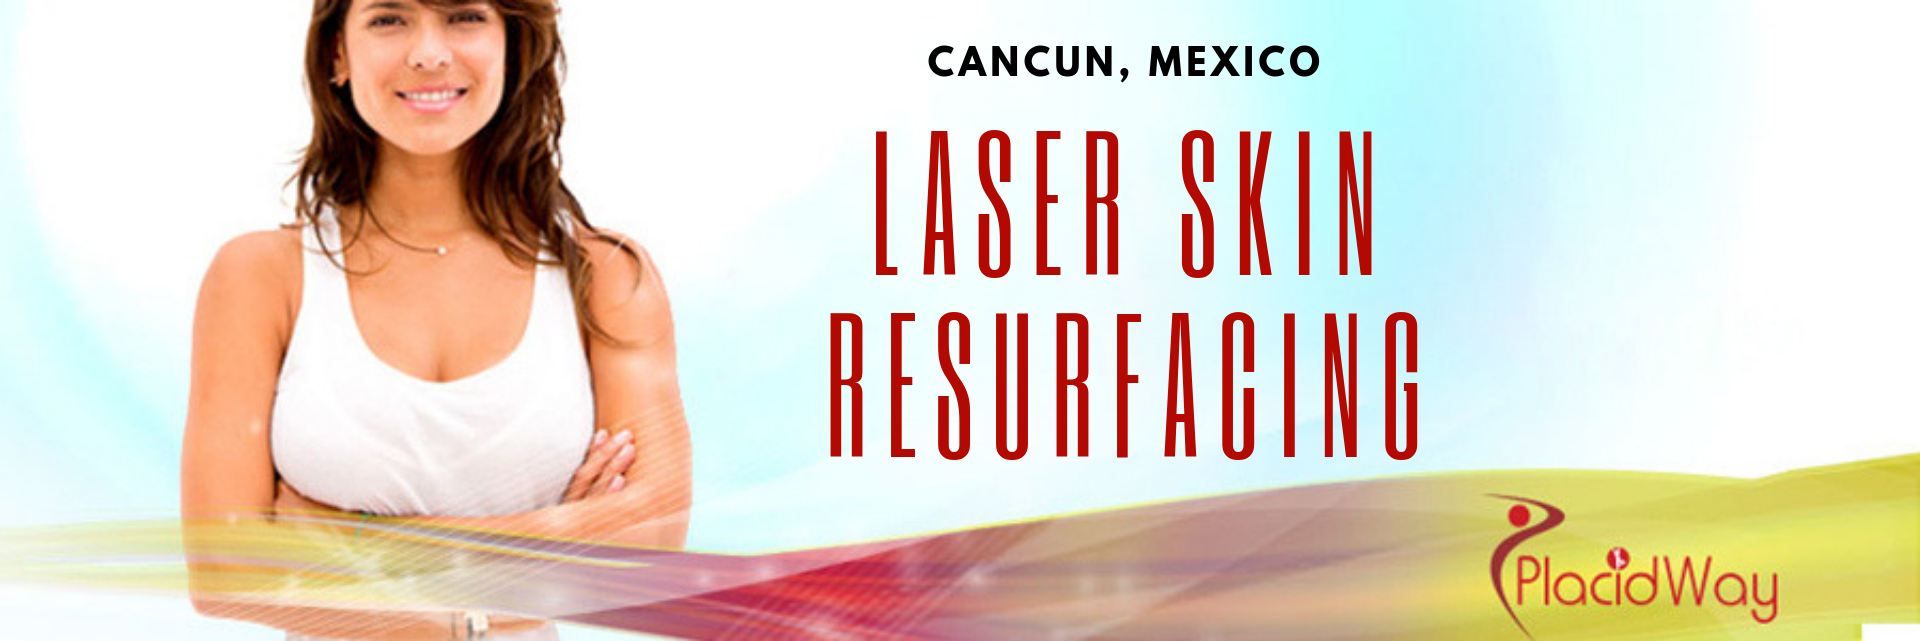 CO2 Laser Resurfacing for Skin, CO2 Laser Treatment in Mexico